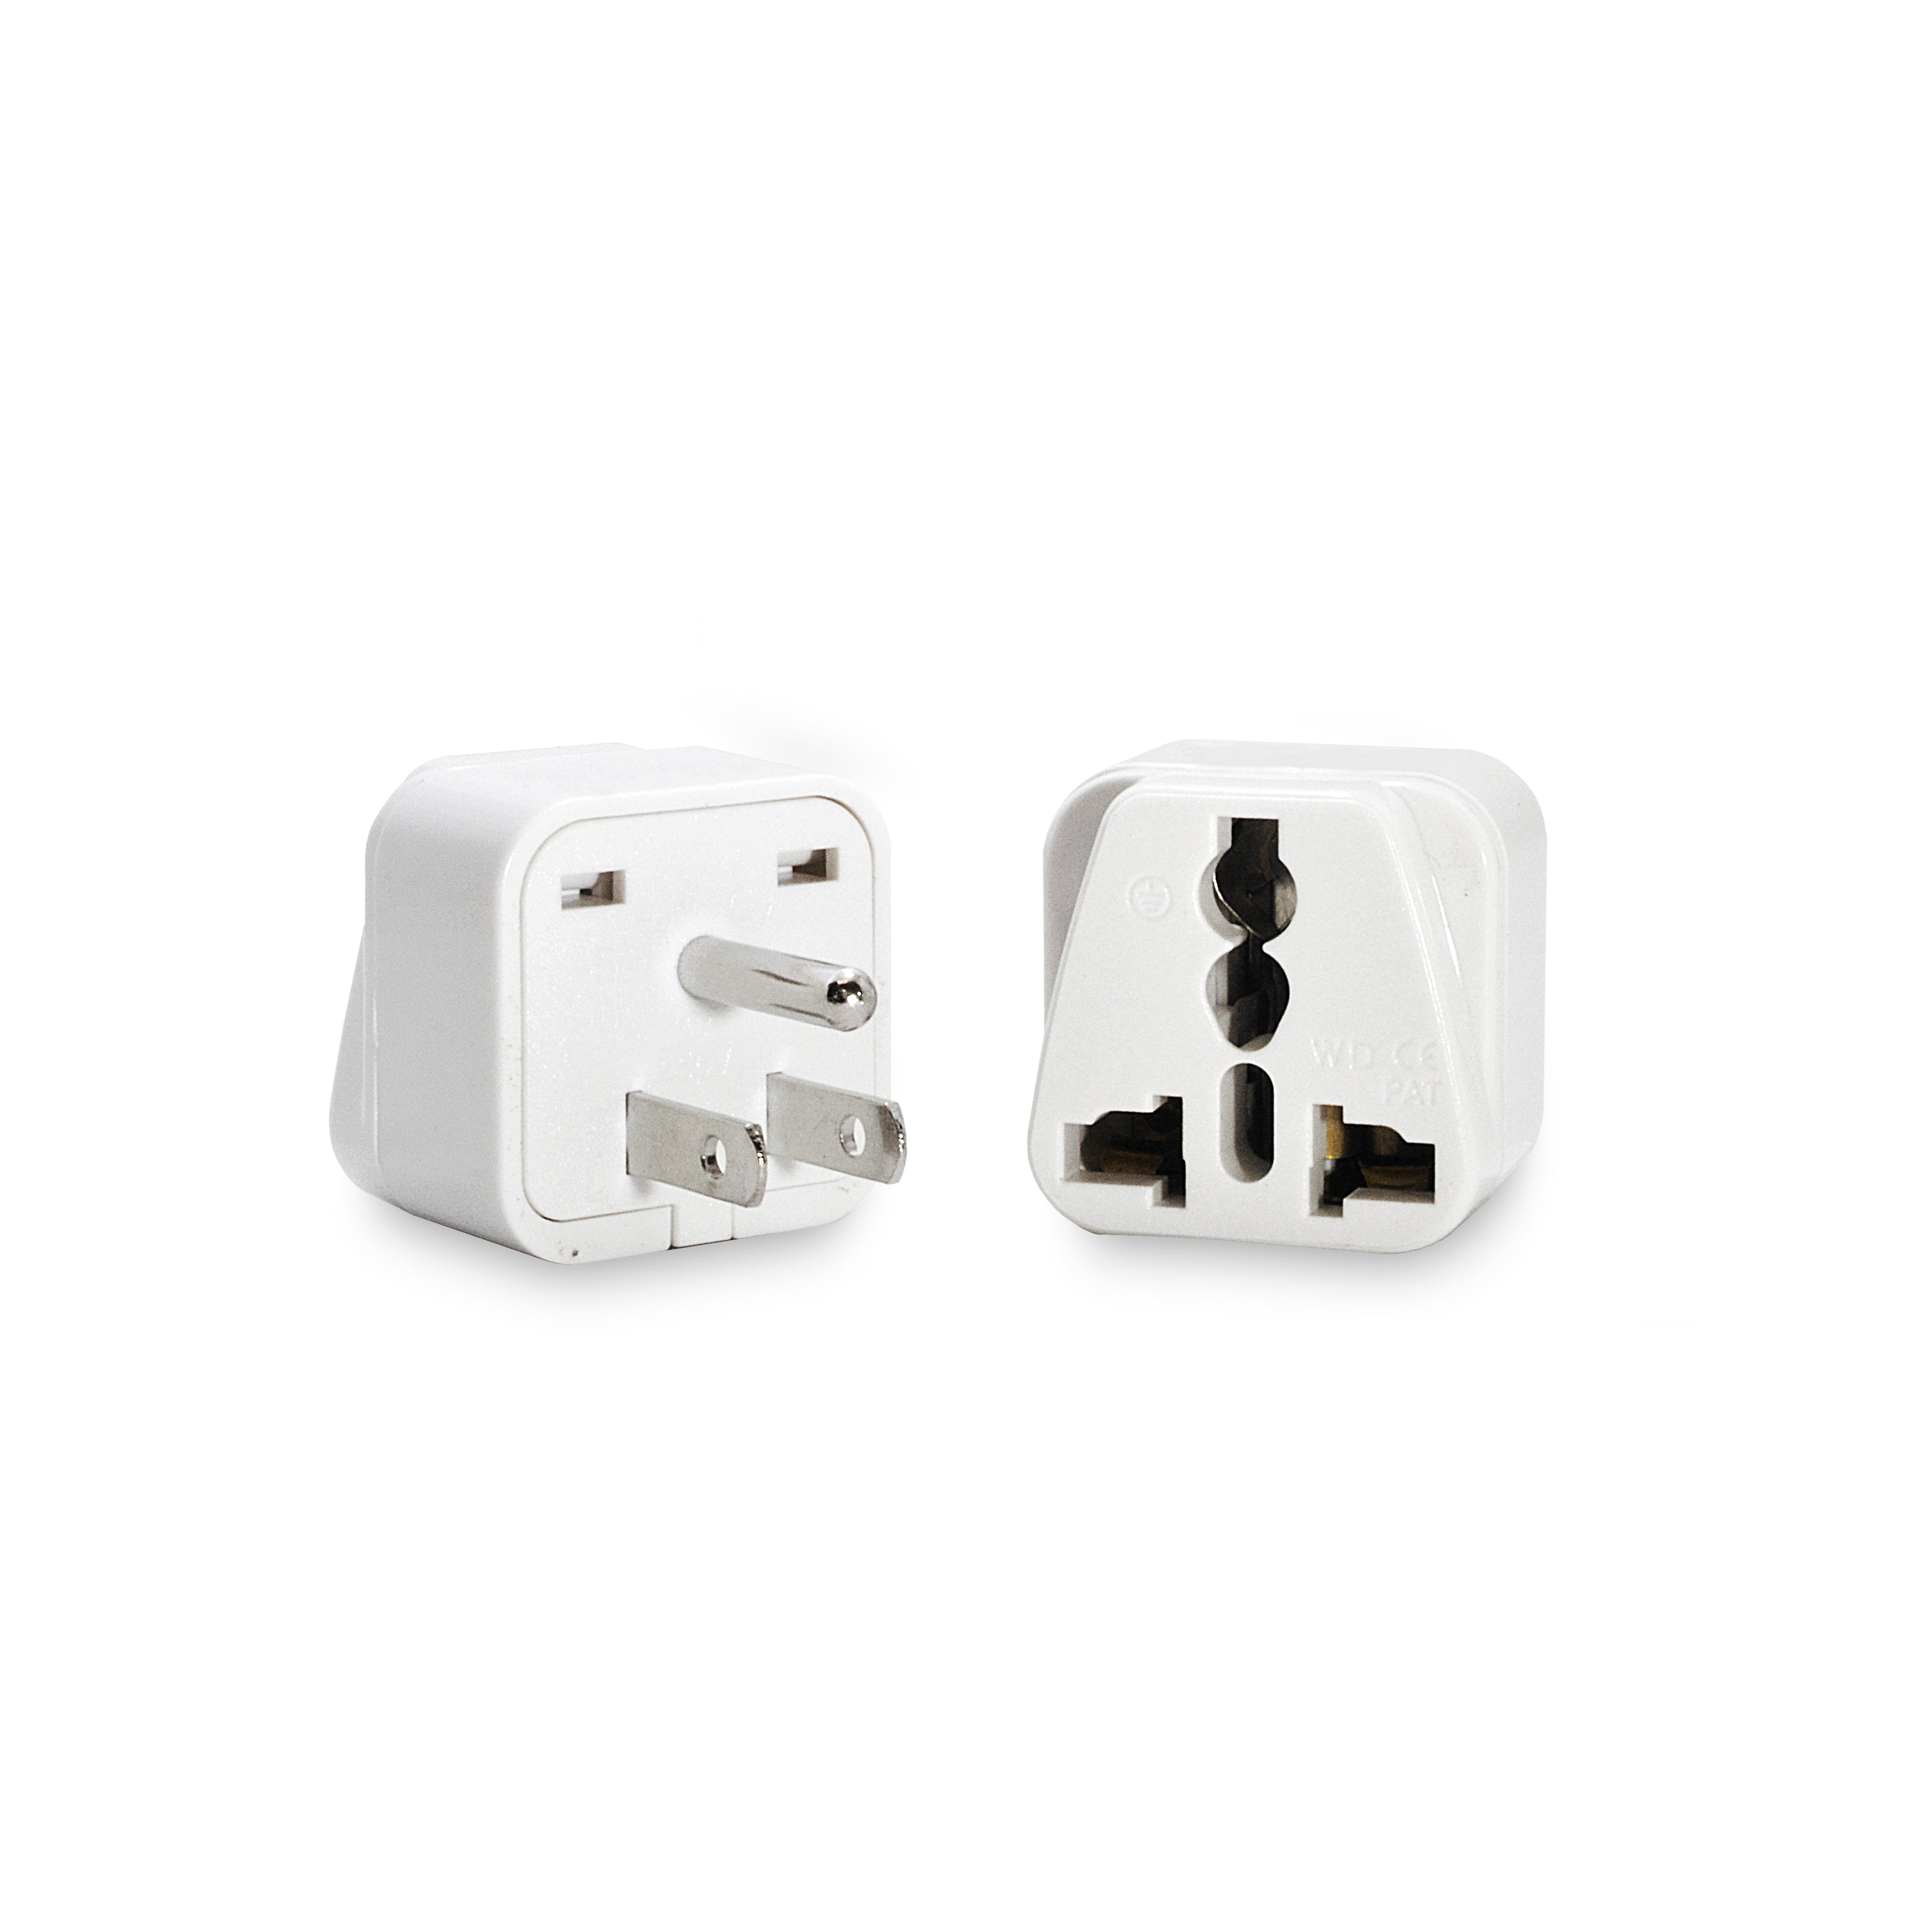 4 Pack Universal Adapter, UK to US Adapter, Europe to US Plug Adapter,  Travel Adapters, European to USA General Adapter, American Outlet Plug  Adapter